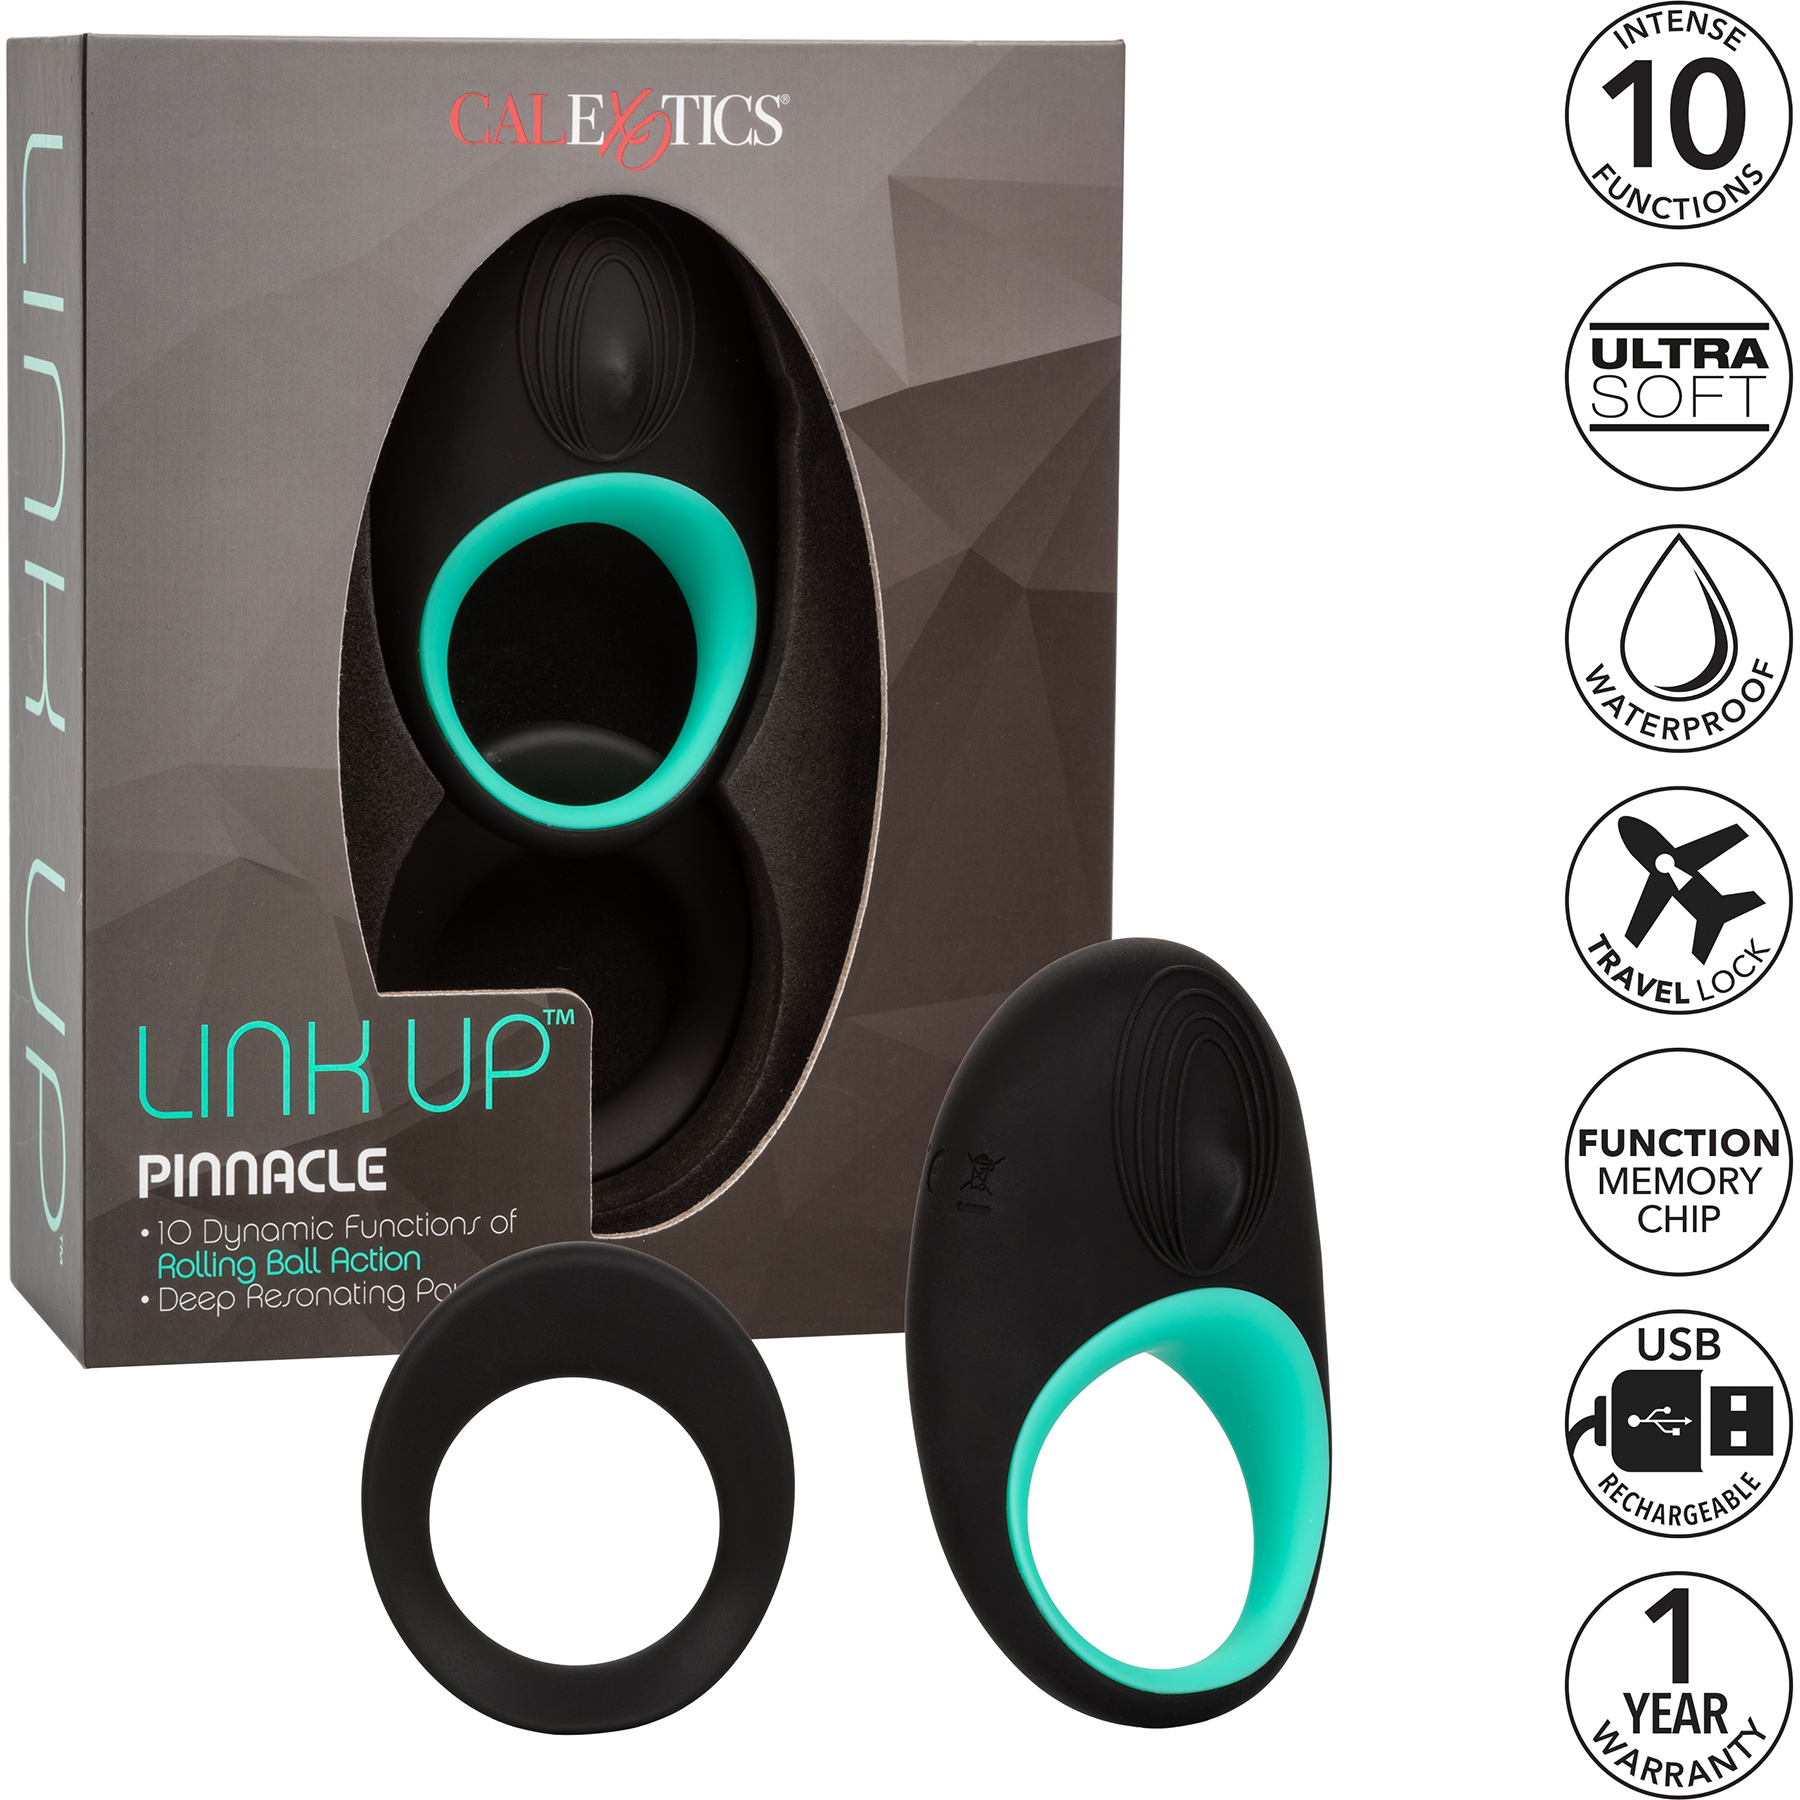 Link Up Pinnacle Silicone Rechargeable Rolling Pleasure Ball Cock Ring - Box & Features